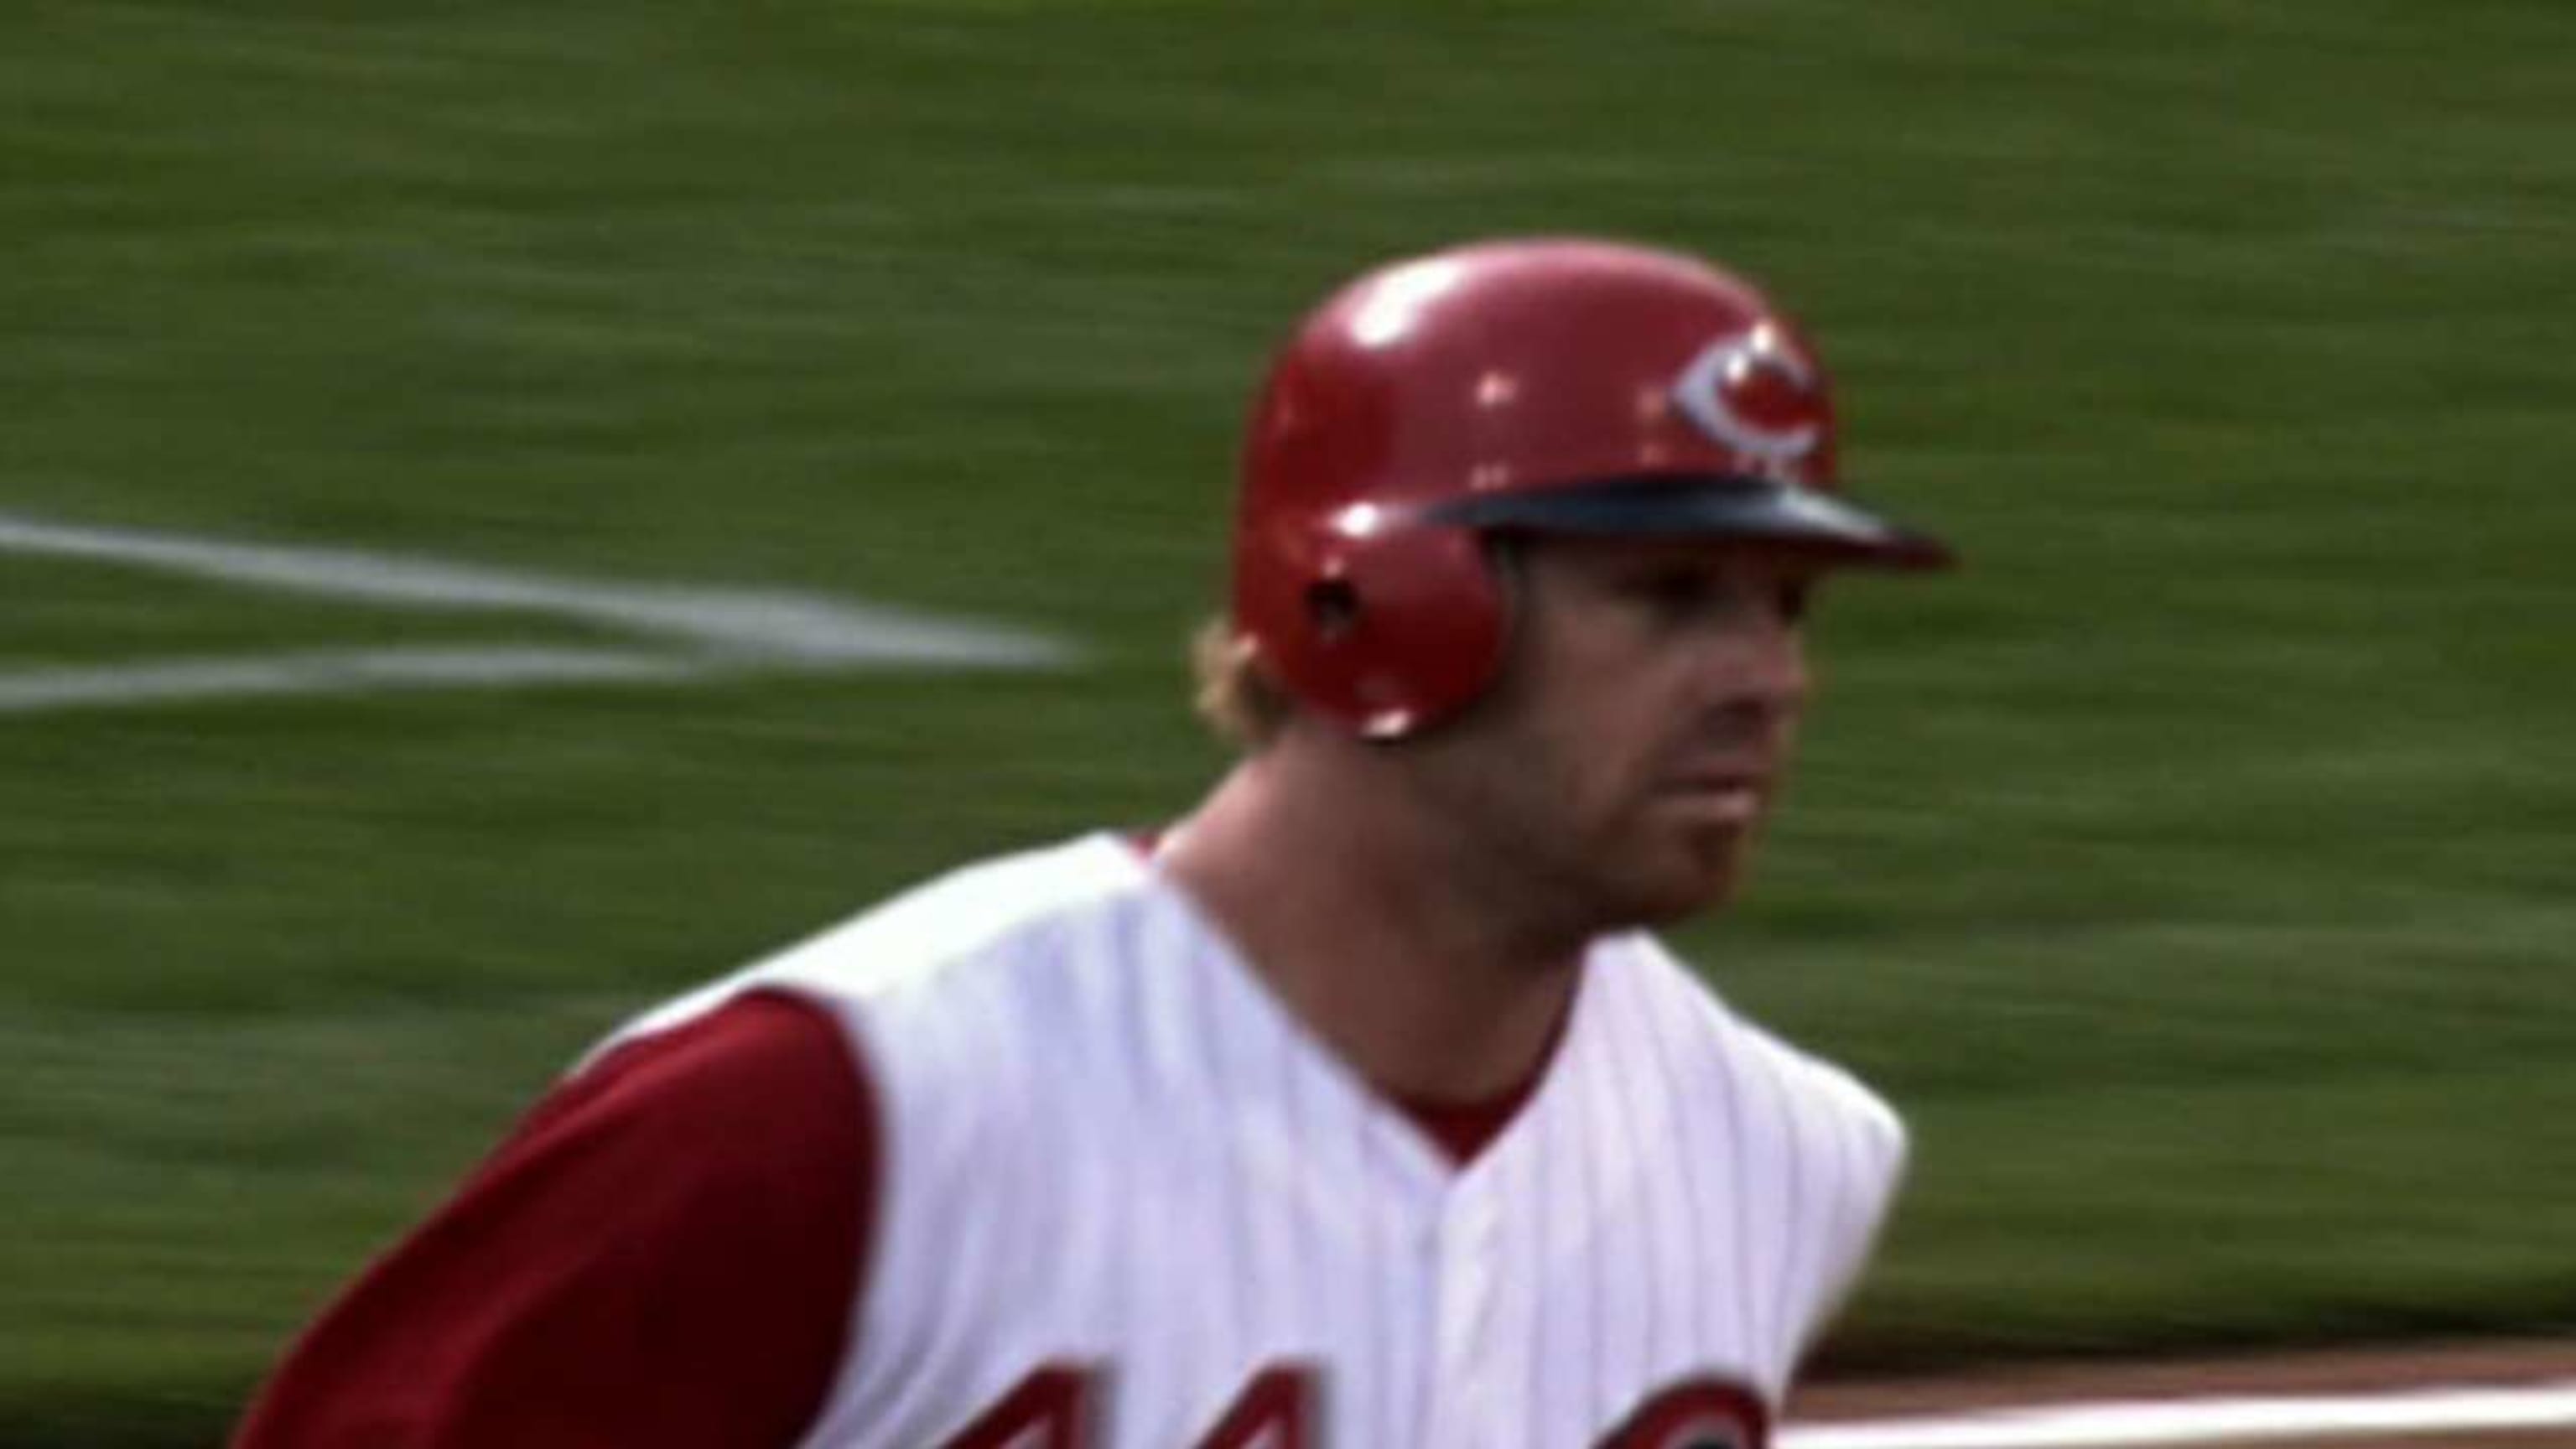 Dave Bristol, Adam Dunn, Fred Norman join Reds hall of fame